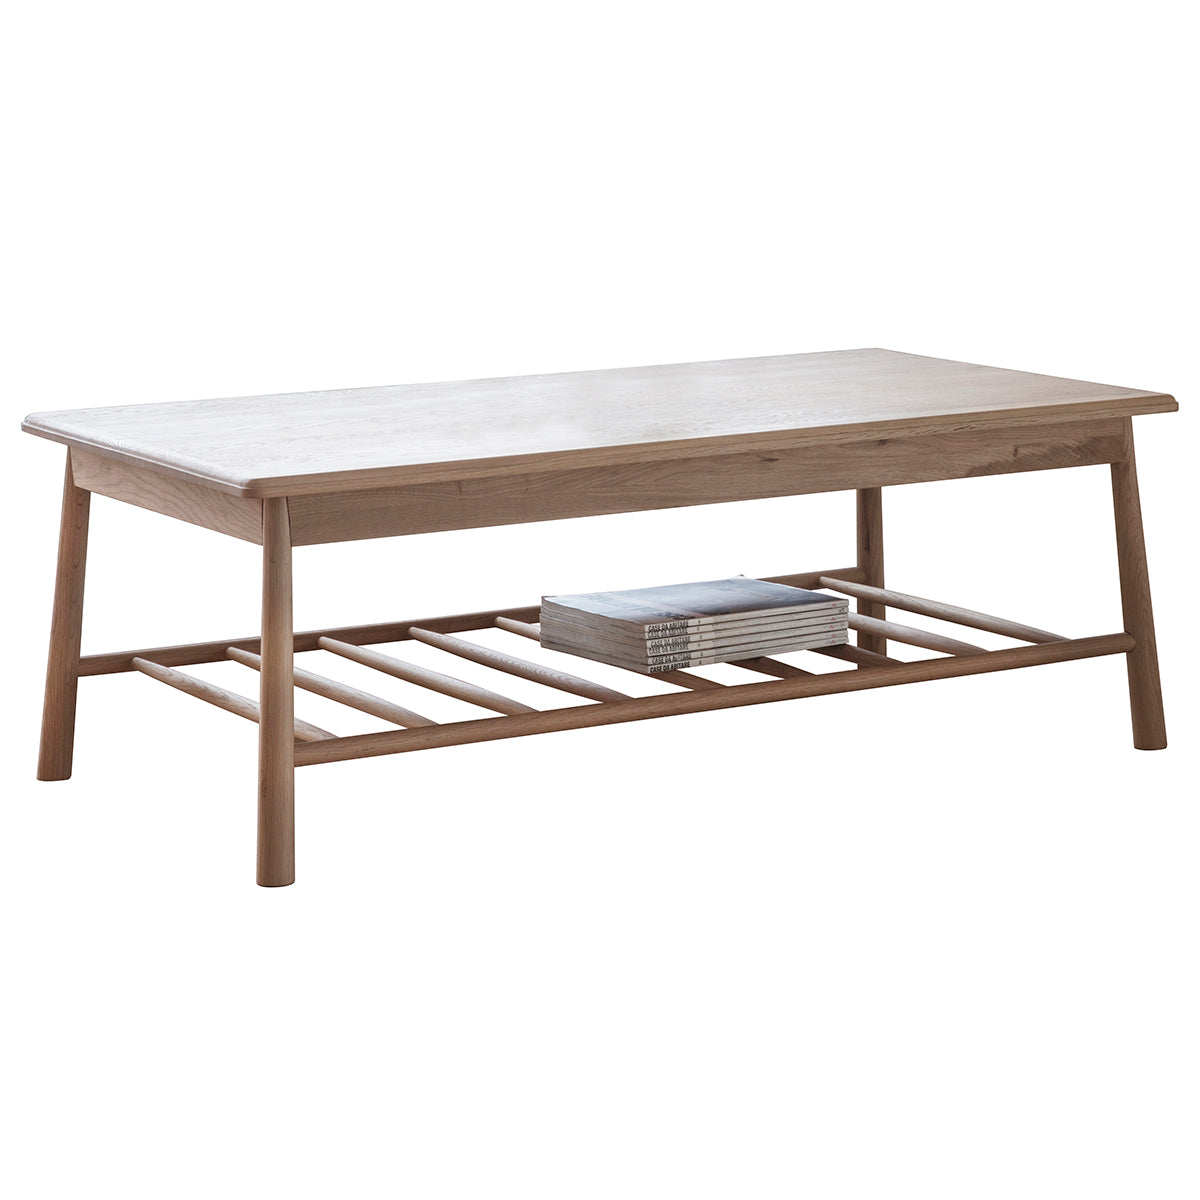 Wycombe Rect Coffee Table 1200x650x425mm